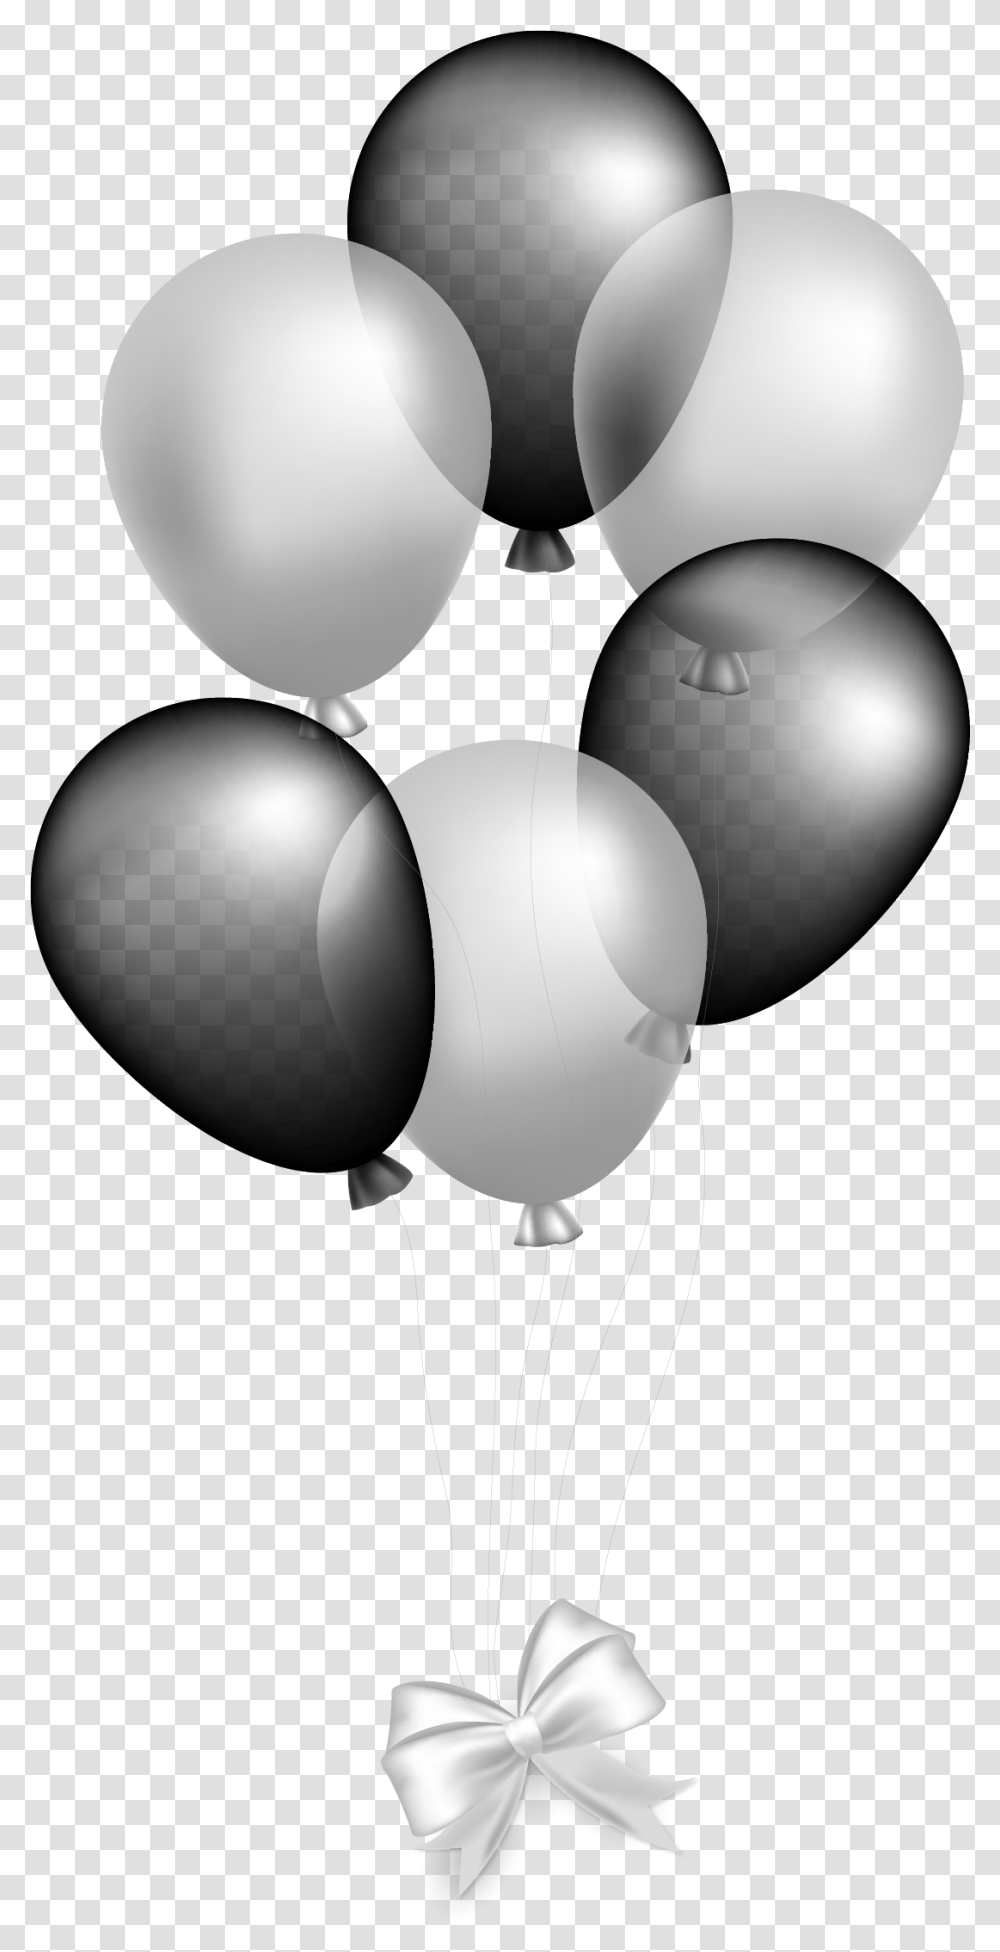 Background Silver Balloons Transparent Png